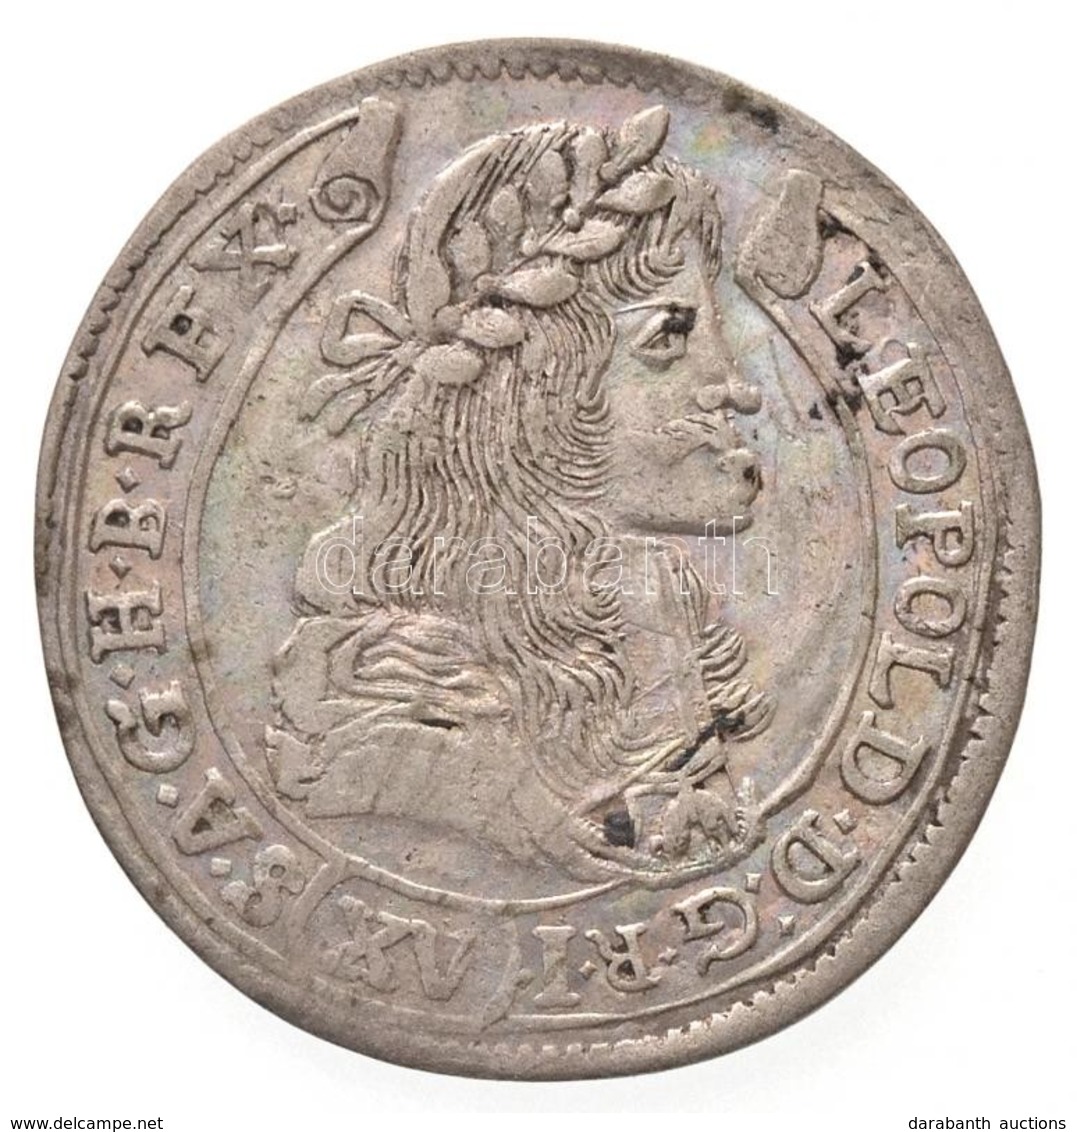 1680K-B 15kr Ag 'I. Lipót' (5,72g) T:2,2-
Hungary 1680K-B 15 Kreuzer Ag 'Leopold I' (5,72g) C:XF,VF
Huszár: 1425., Unger - Unclassified